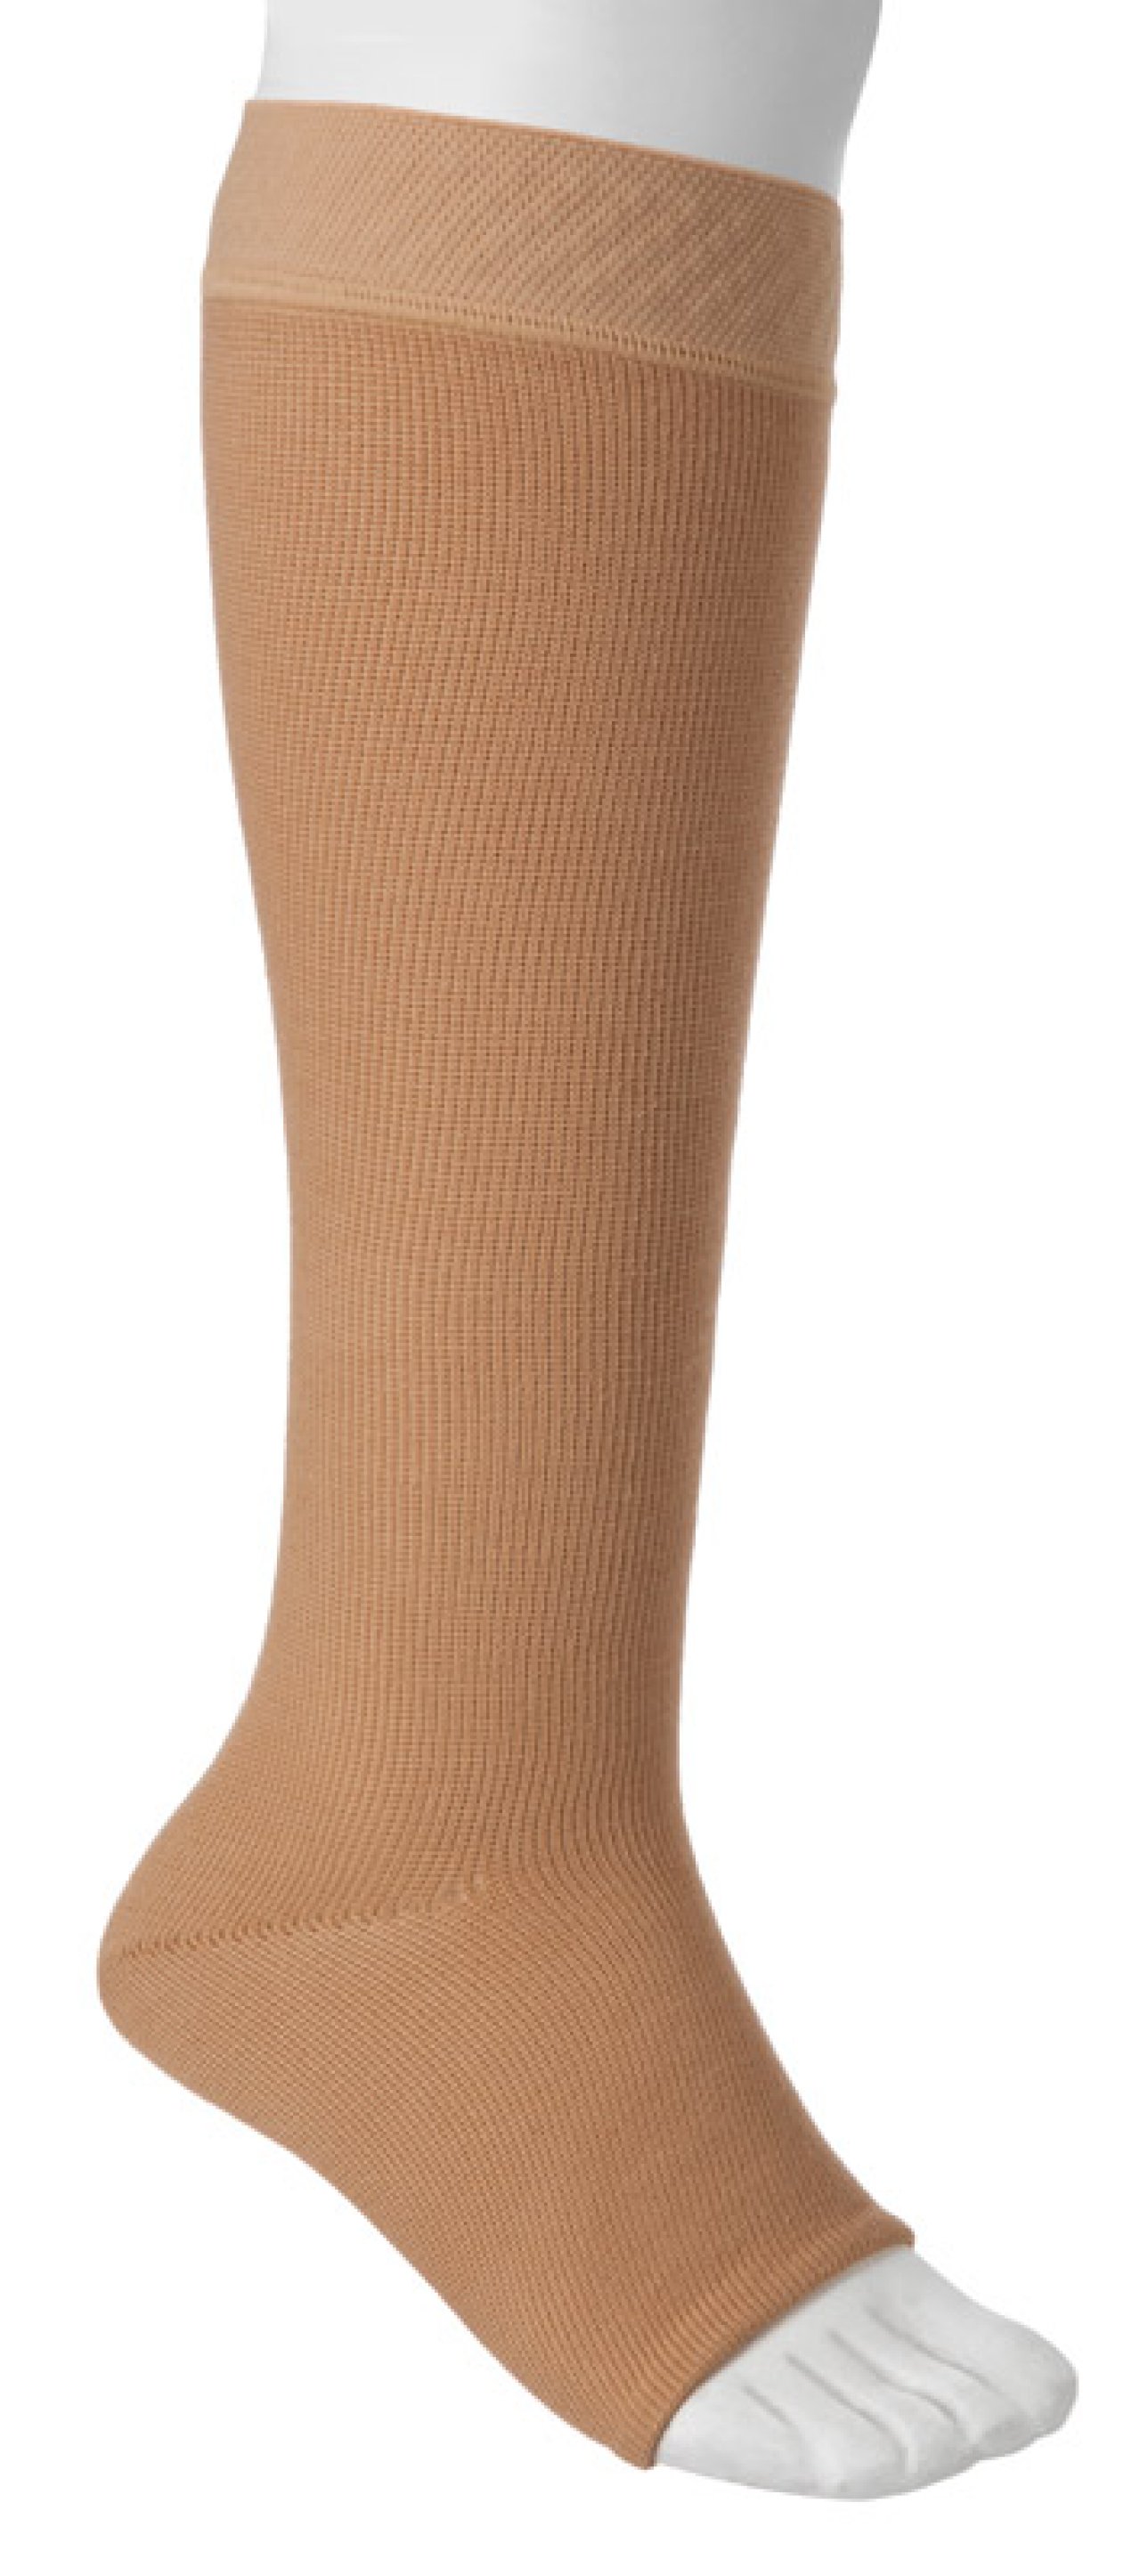 Do low grade compression stockings come in made to measure to make